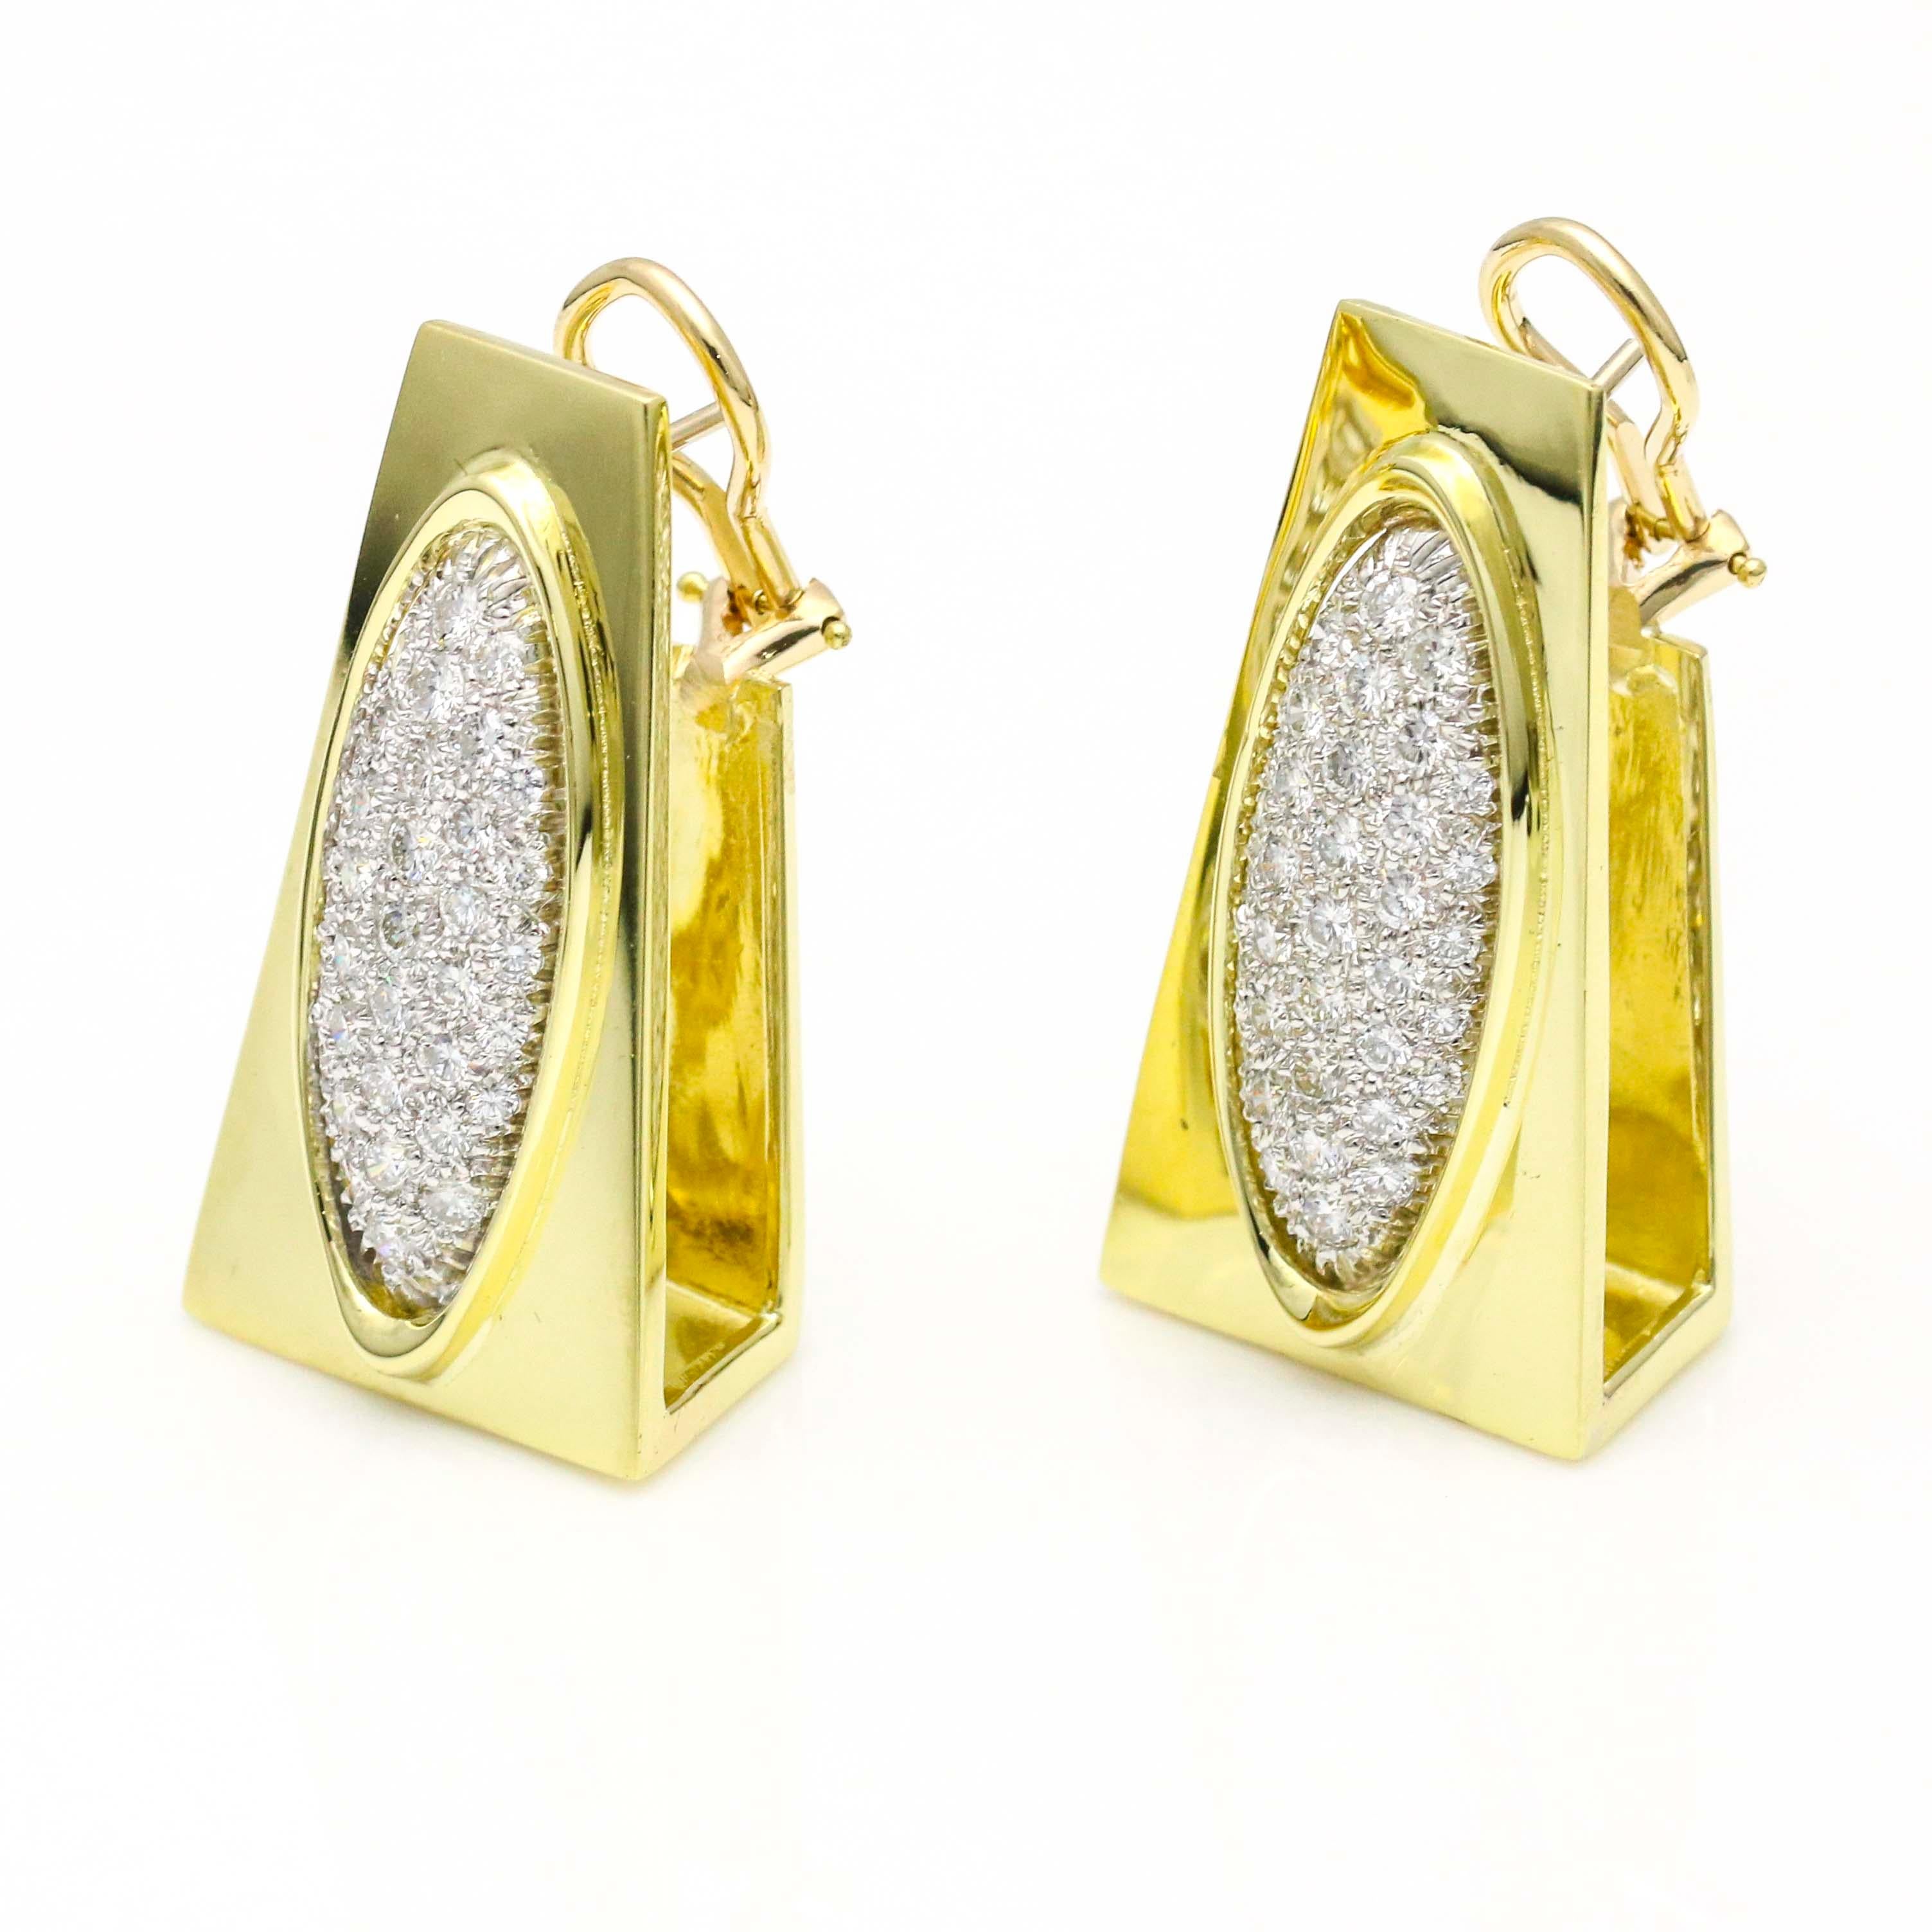 Vintage Henry Dunay earrings in 18k yellow gold with 3 carats of fiery diamonds. Circa 1980s. Omega backs. Diamonds VVS-VS, G+.